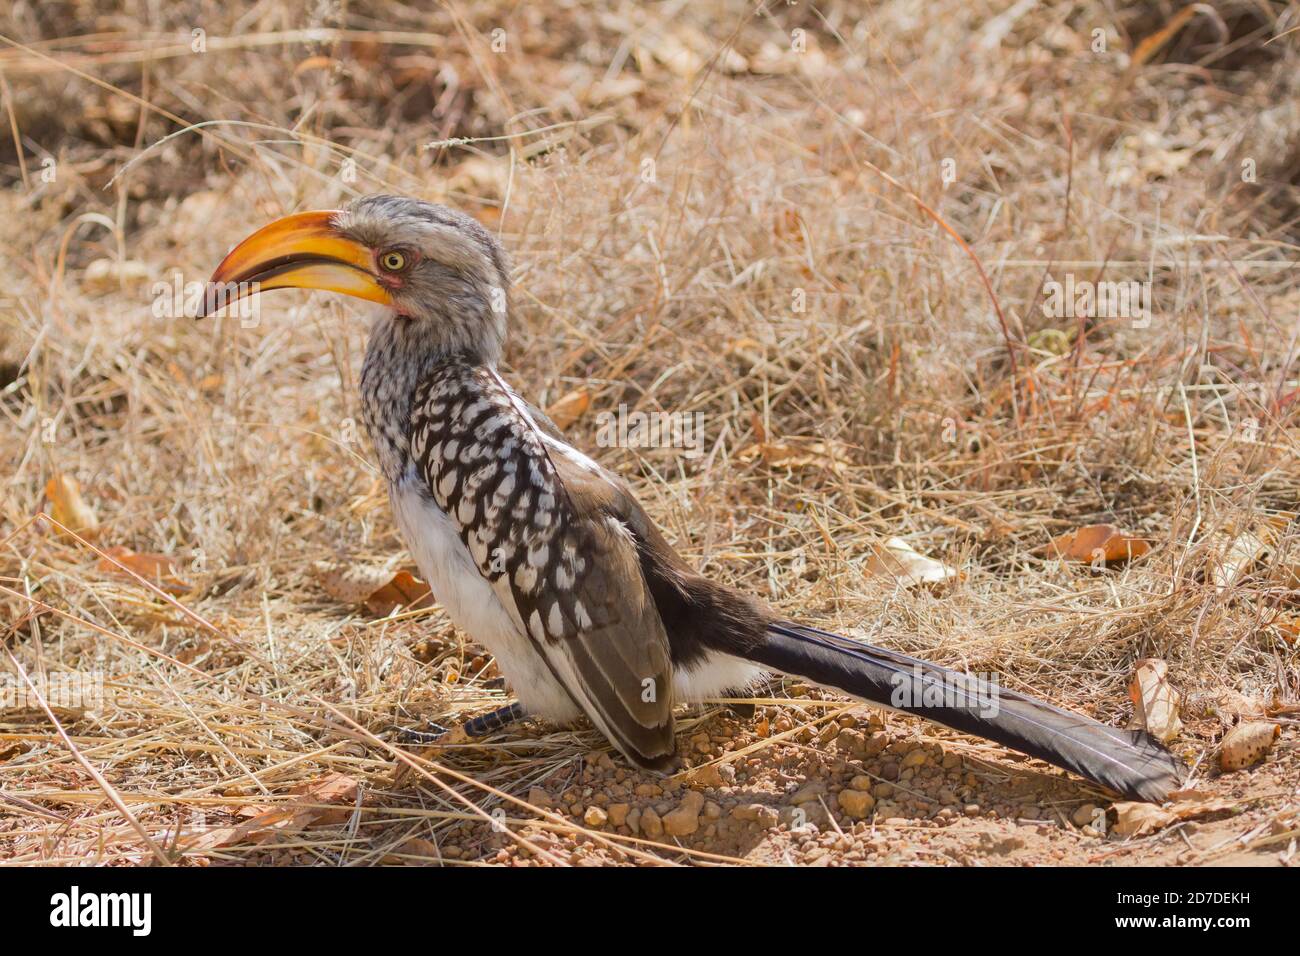 Southern yellow-billed hornbill closeup (Tockus leucomelas) foraging on the ground for insects in South Africa with bokeh background Stock Photo